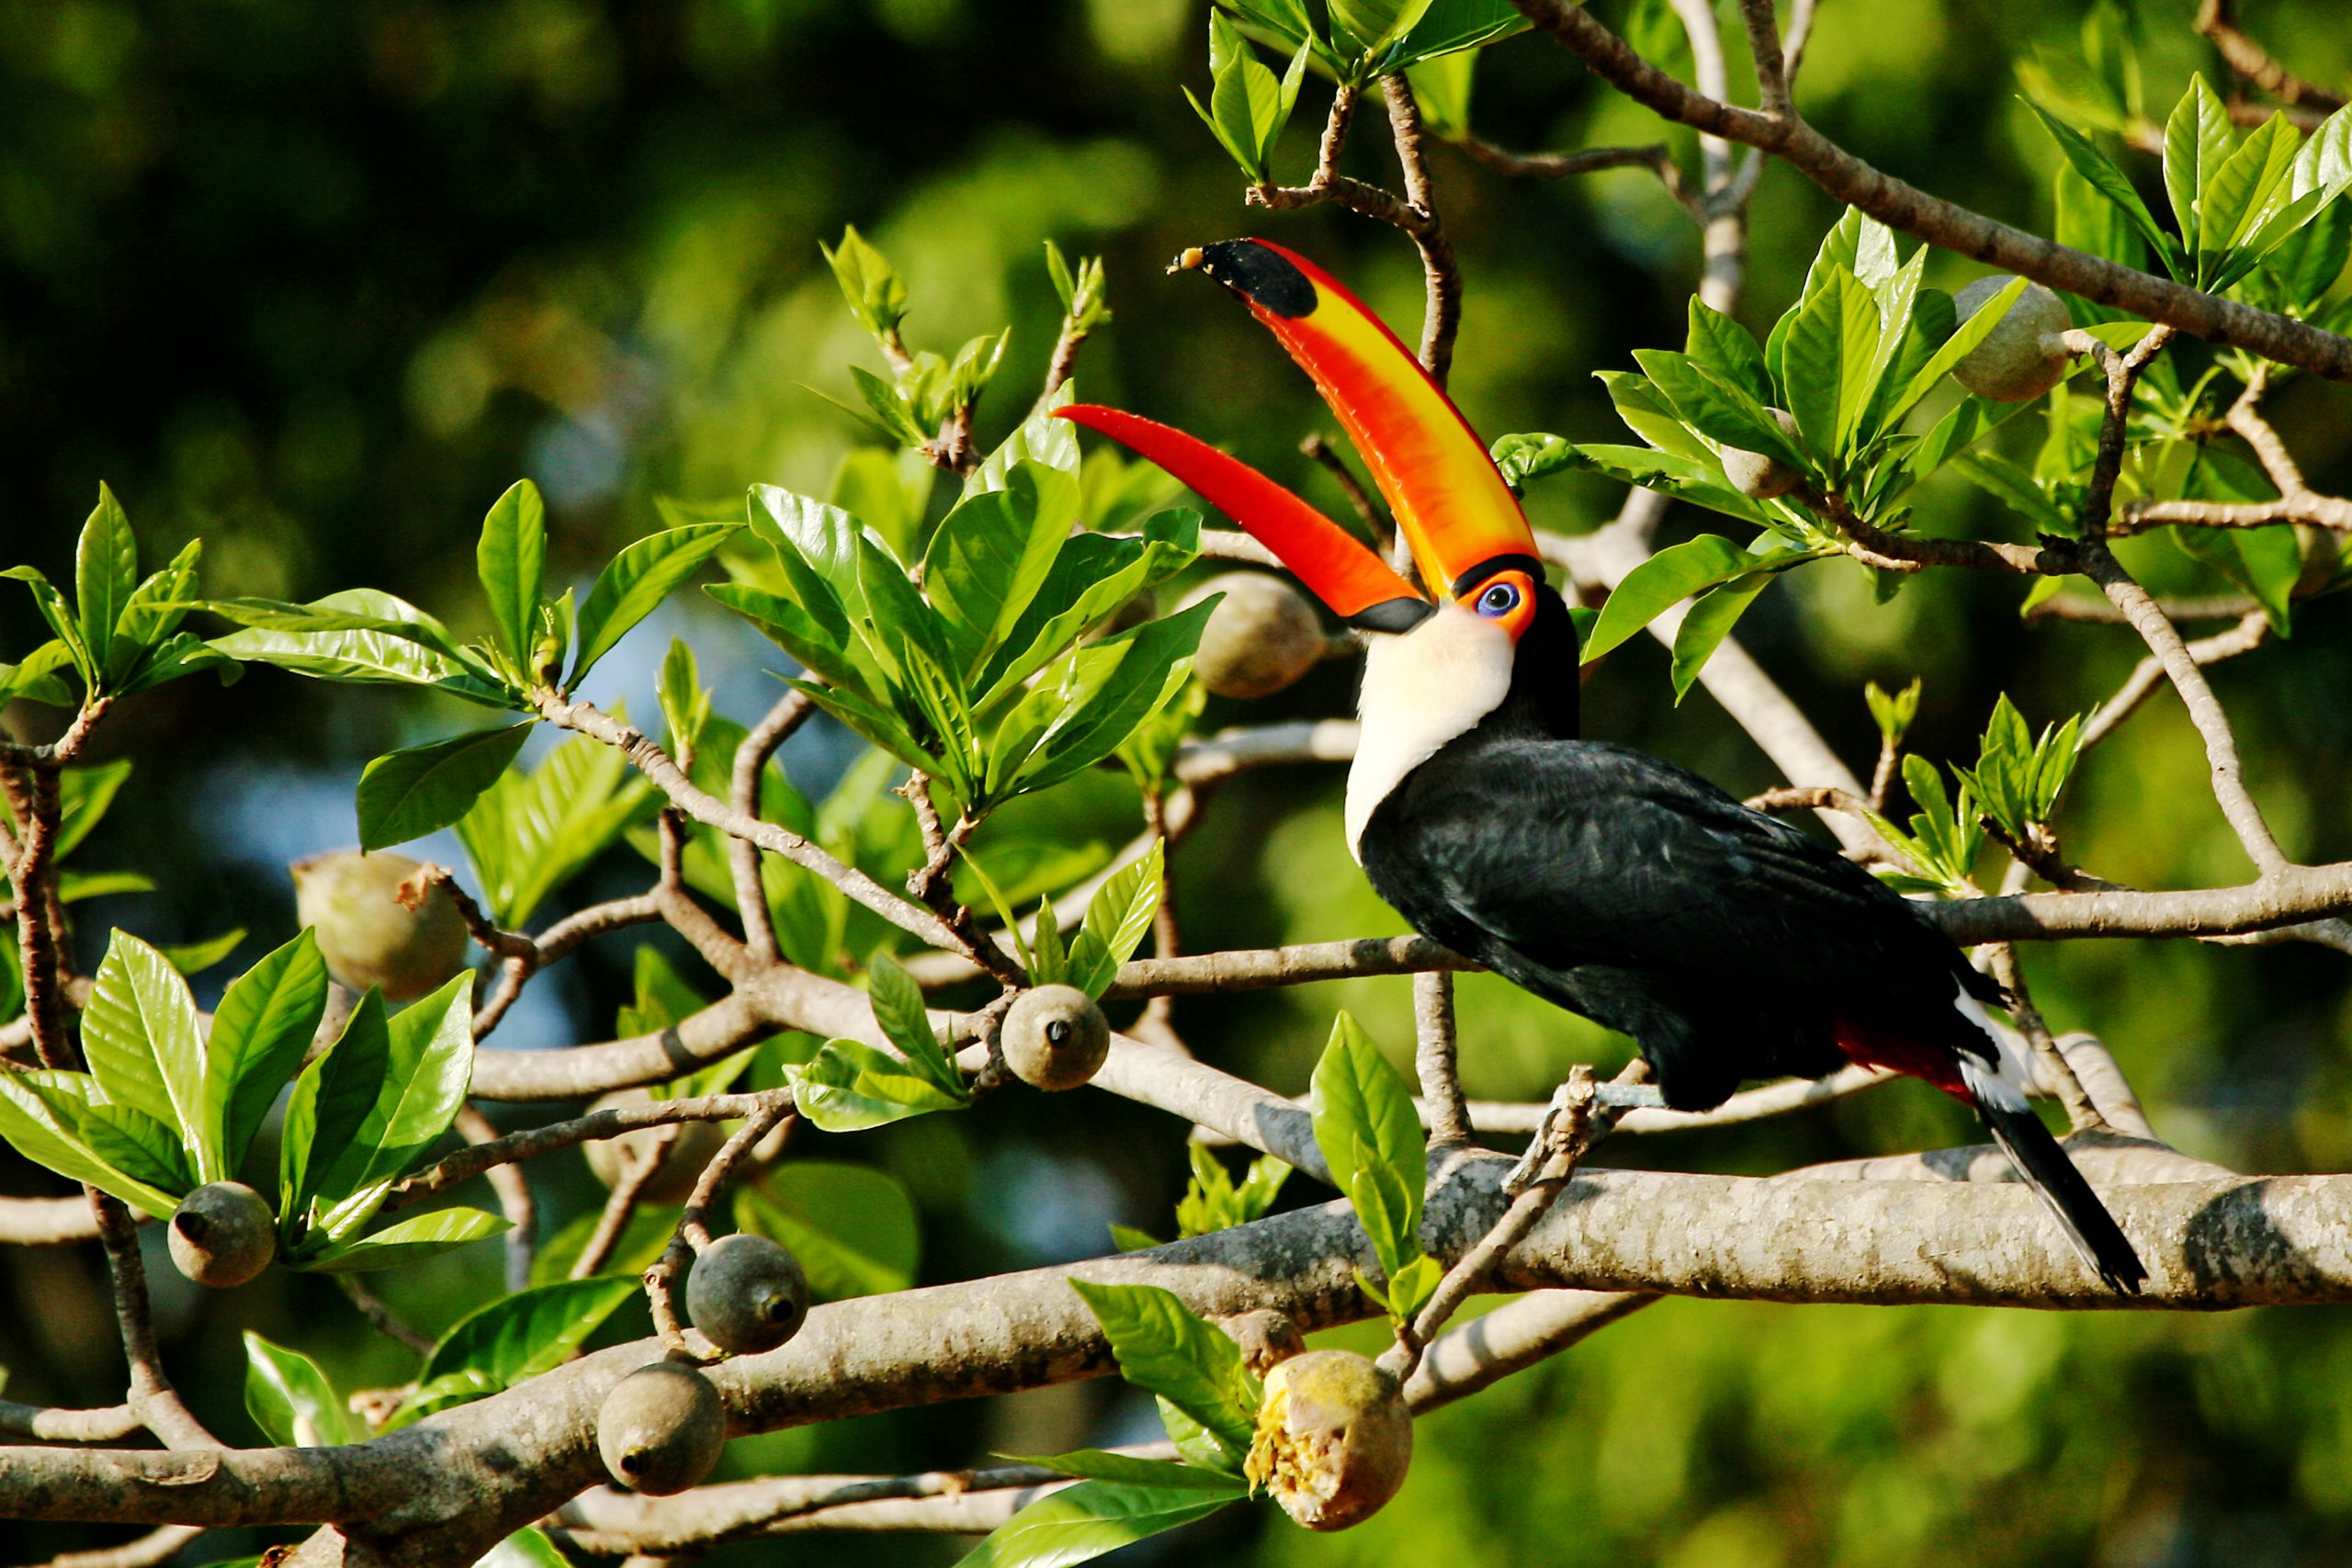 Toco toucan in branches, Pantanal, Brazil.